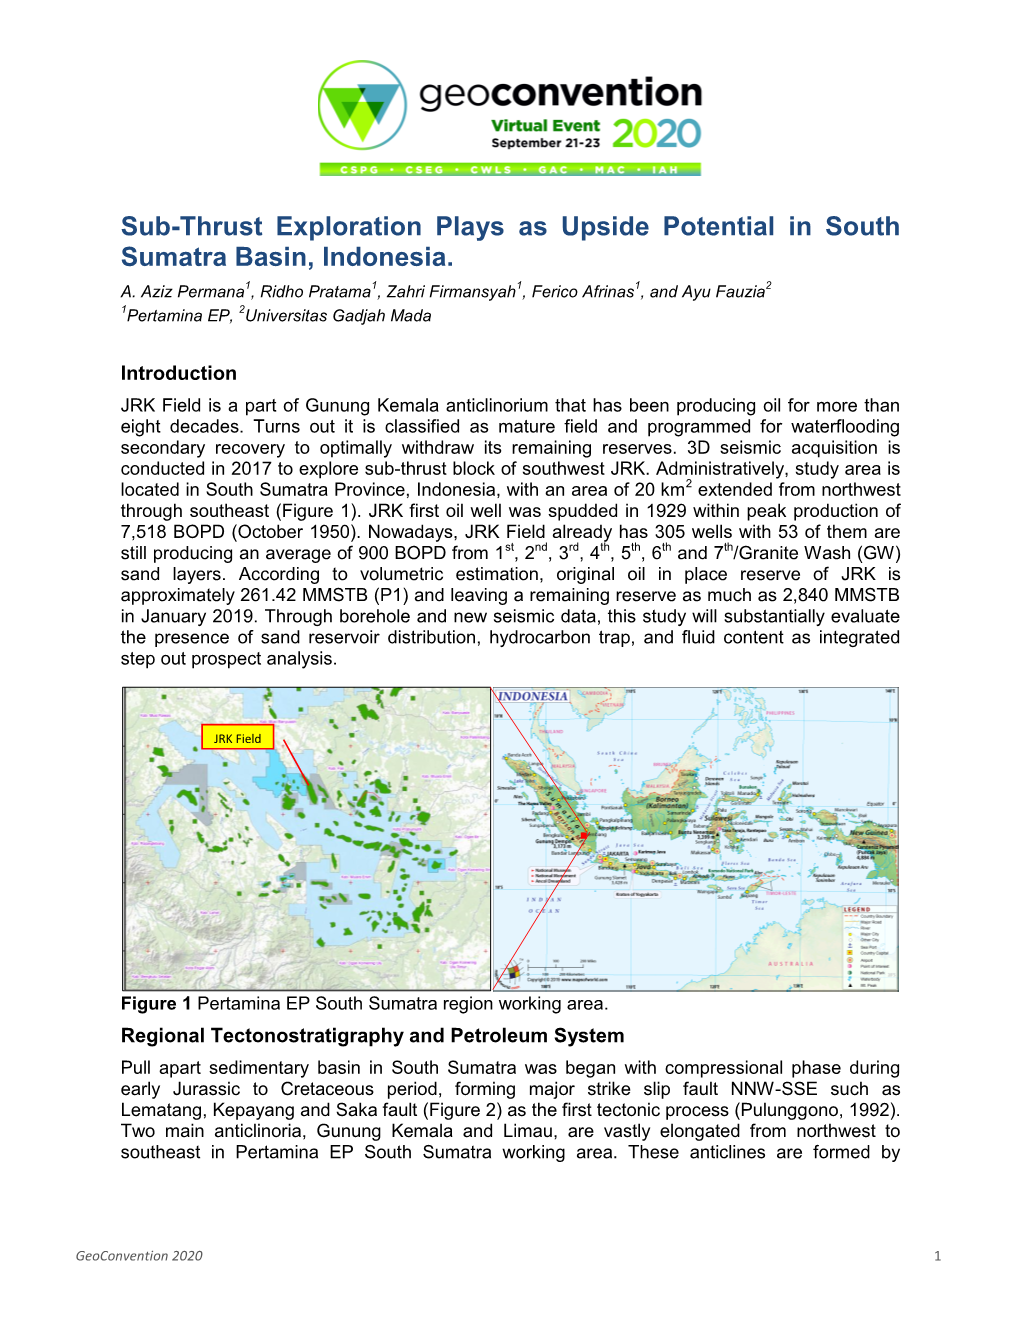 Sub-Thrust Exploration Plays As Upside Potential in South Sumatra Basin, Indonesia